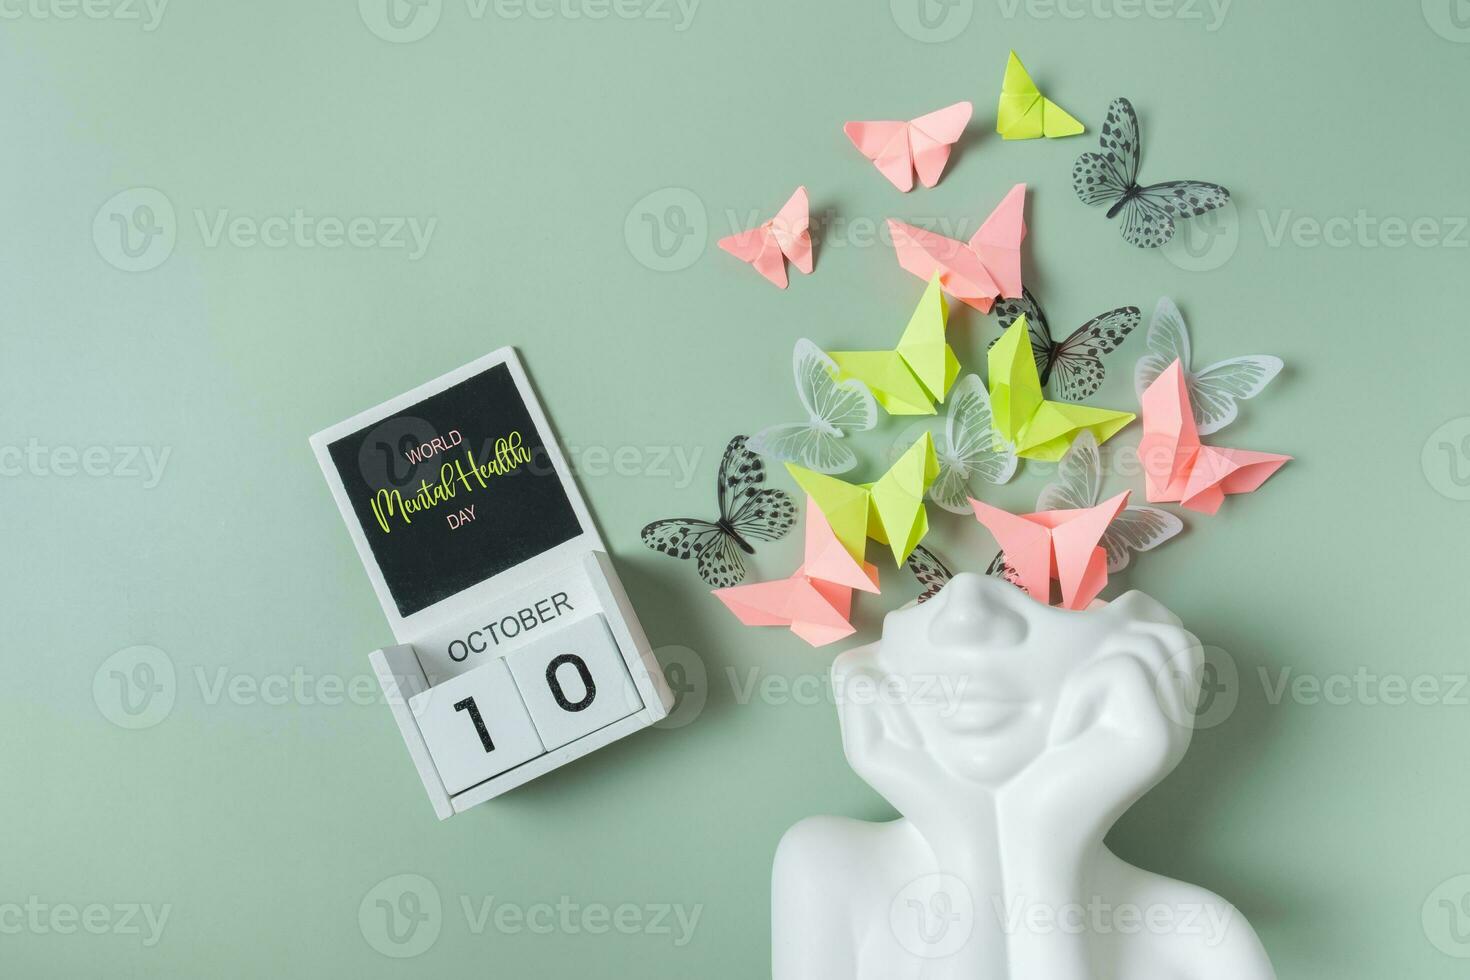 October 10 is World Mental Health Day. Head figurine with butterfly filling photo